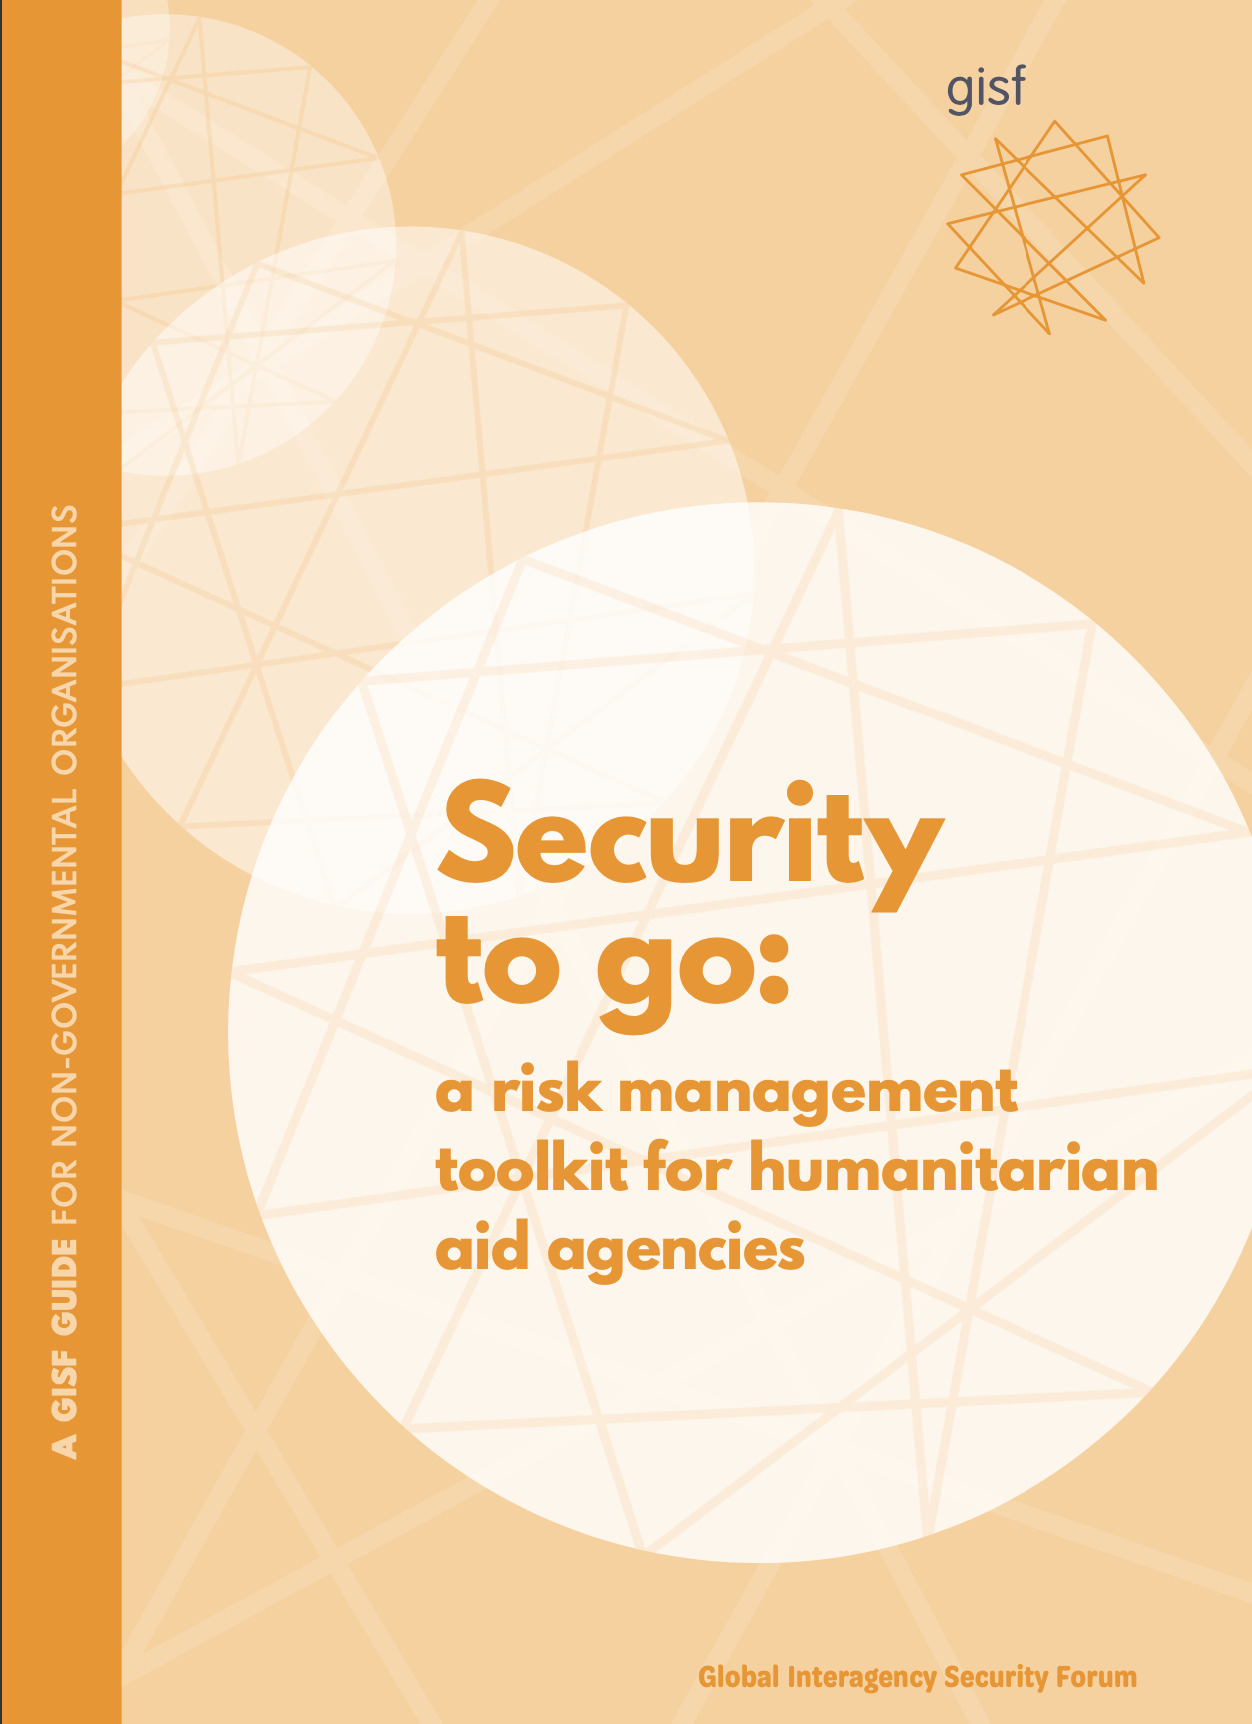 Security to go: a risk management toolkit for humanitarian aid agencies